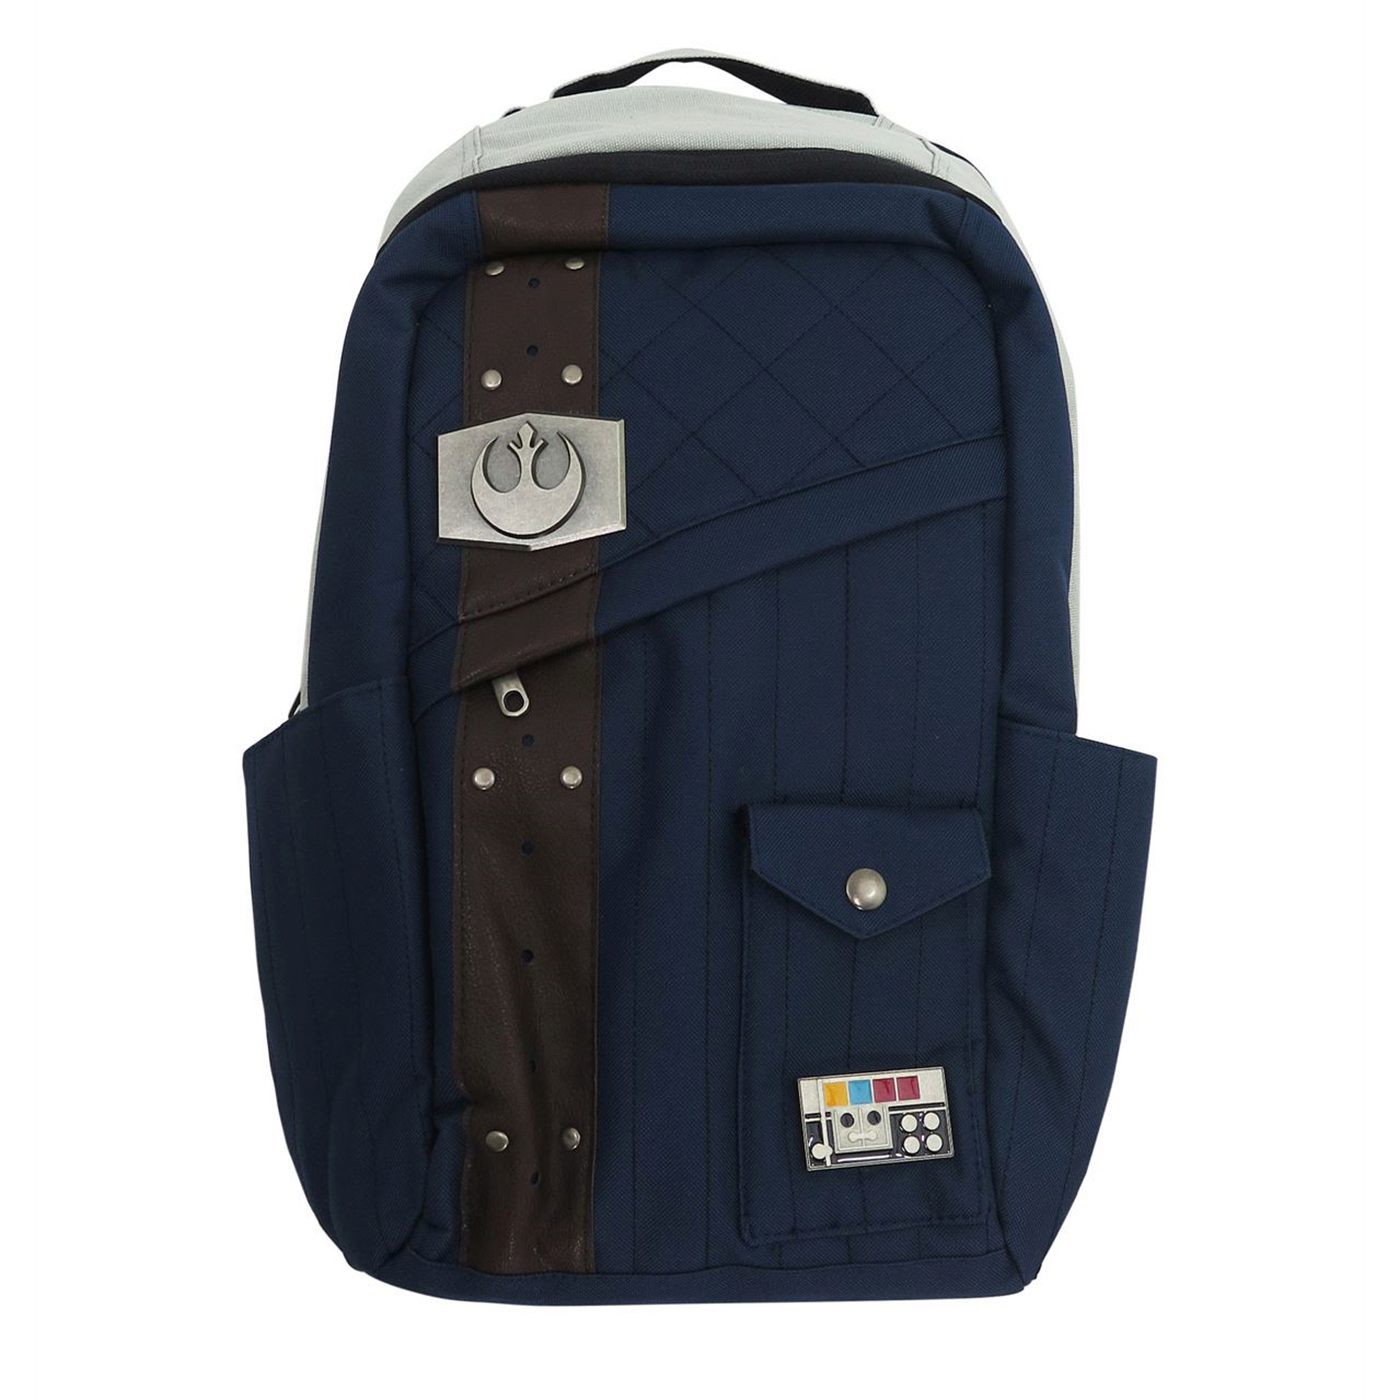 Star Wars Han Solo Hoth Laptop Backpack